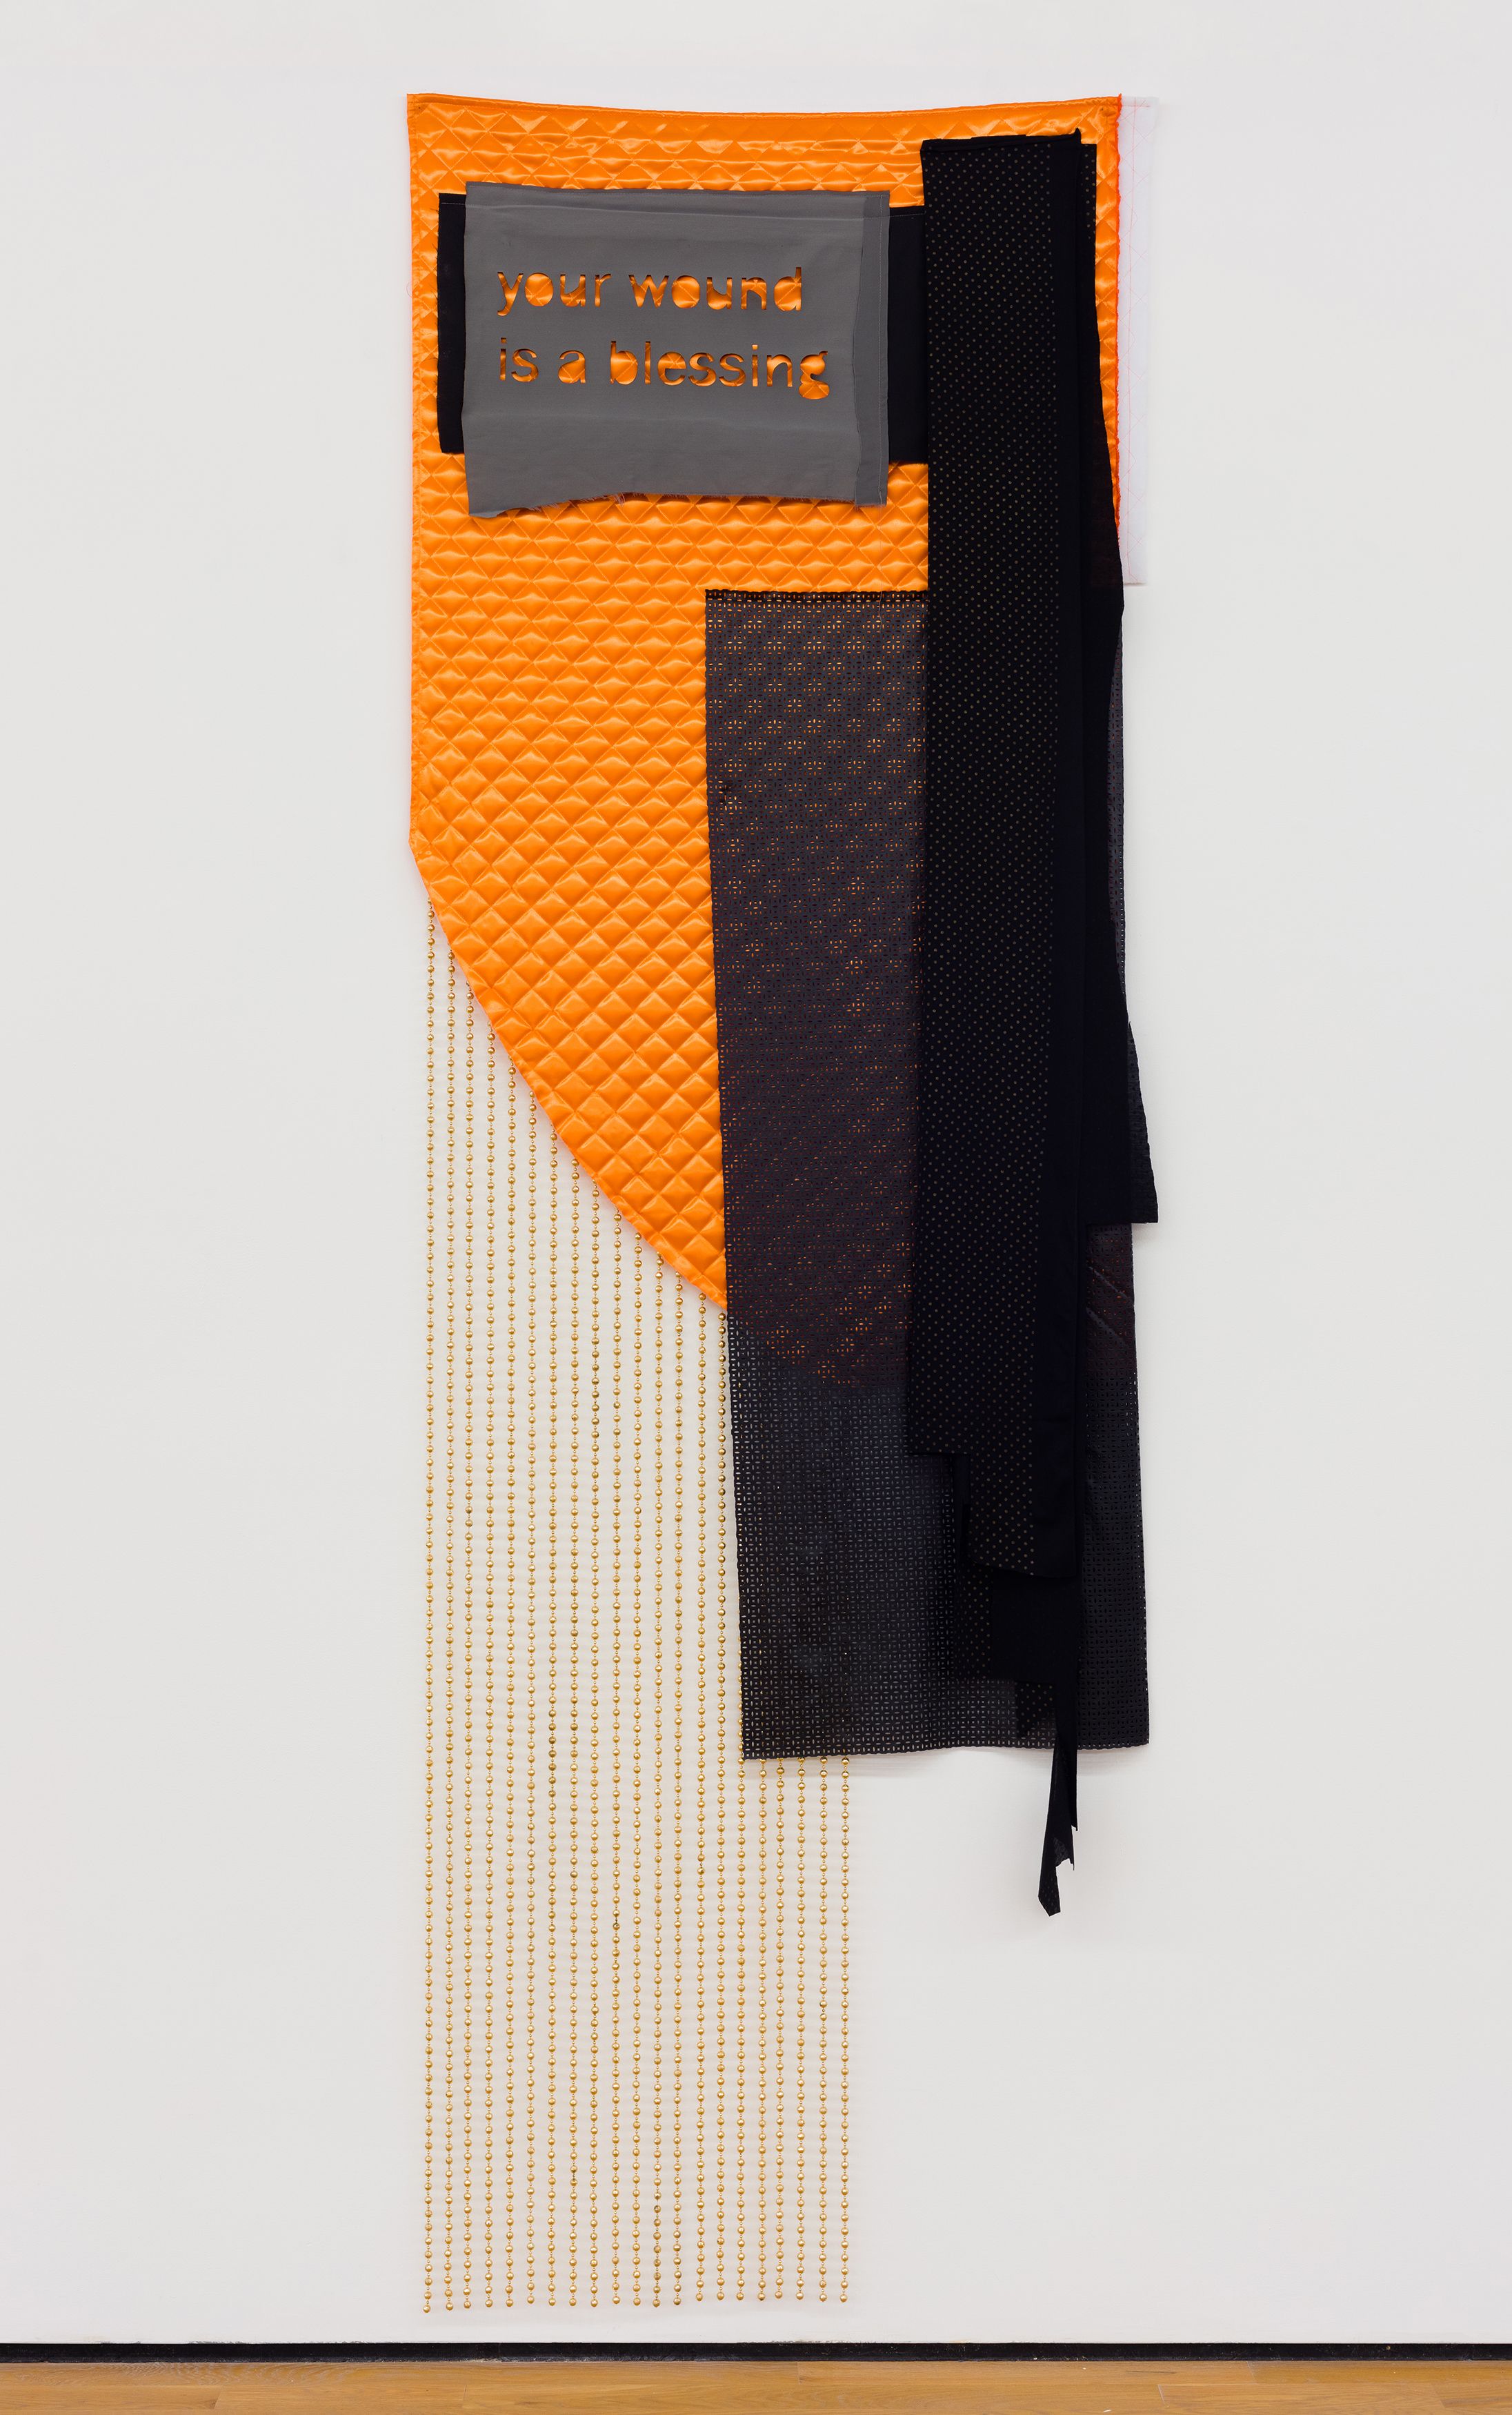 Tuesday Smillie, Wound, 2018, textile and beads, 108 x 36 in. (274.32 x 91.44 cm.)